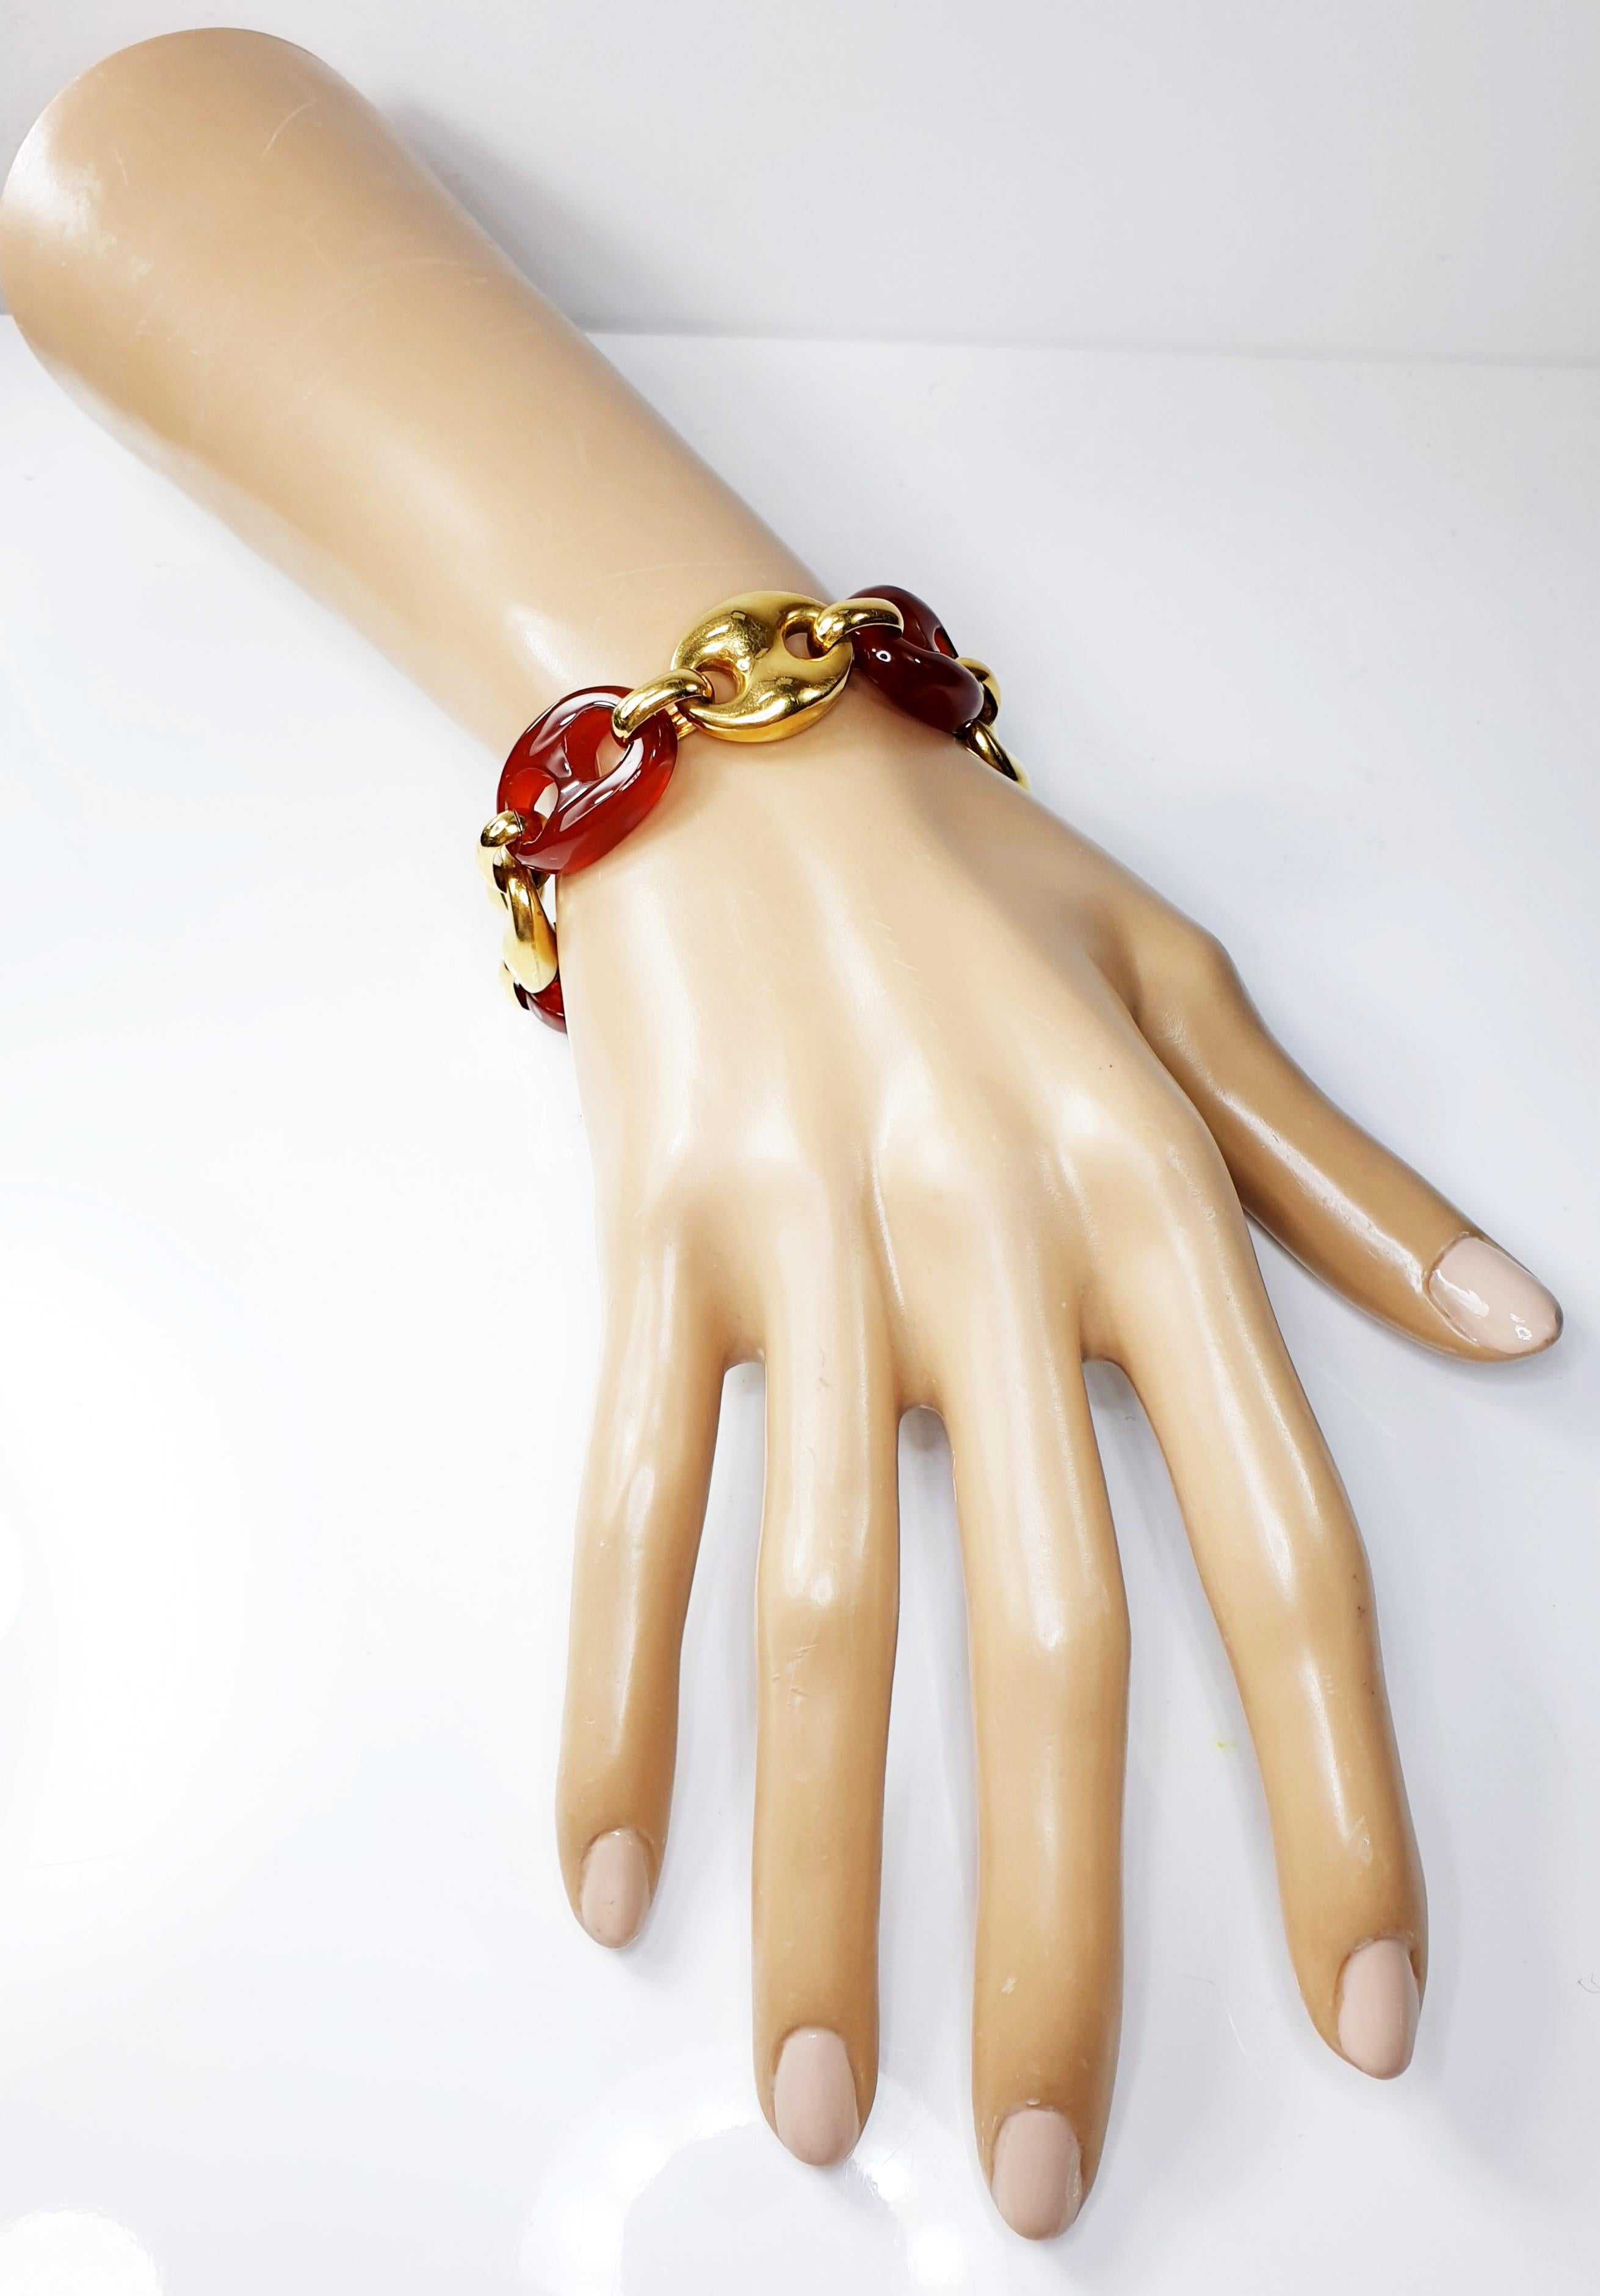 Women's Nautical Anchor Link Bracelet 18 Karat Solid Yellow Gold and Red Carnelian